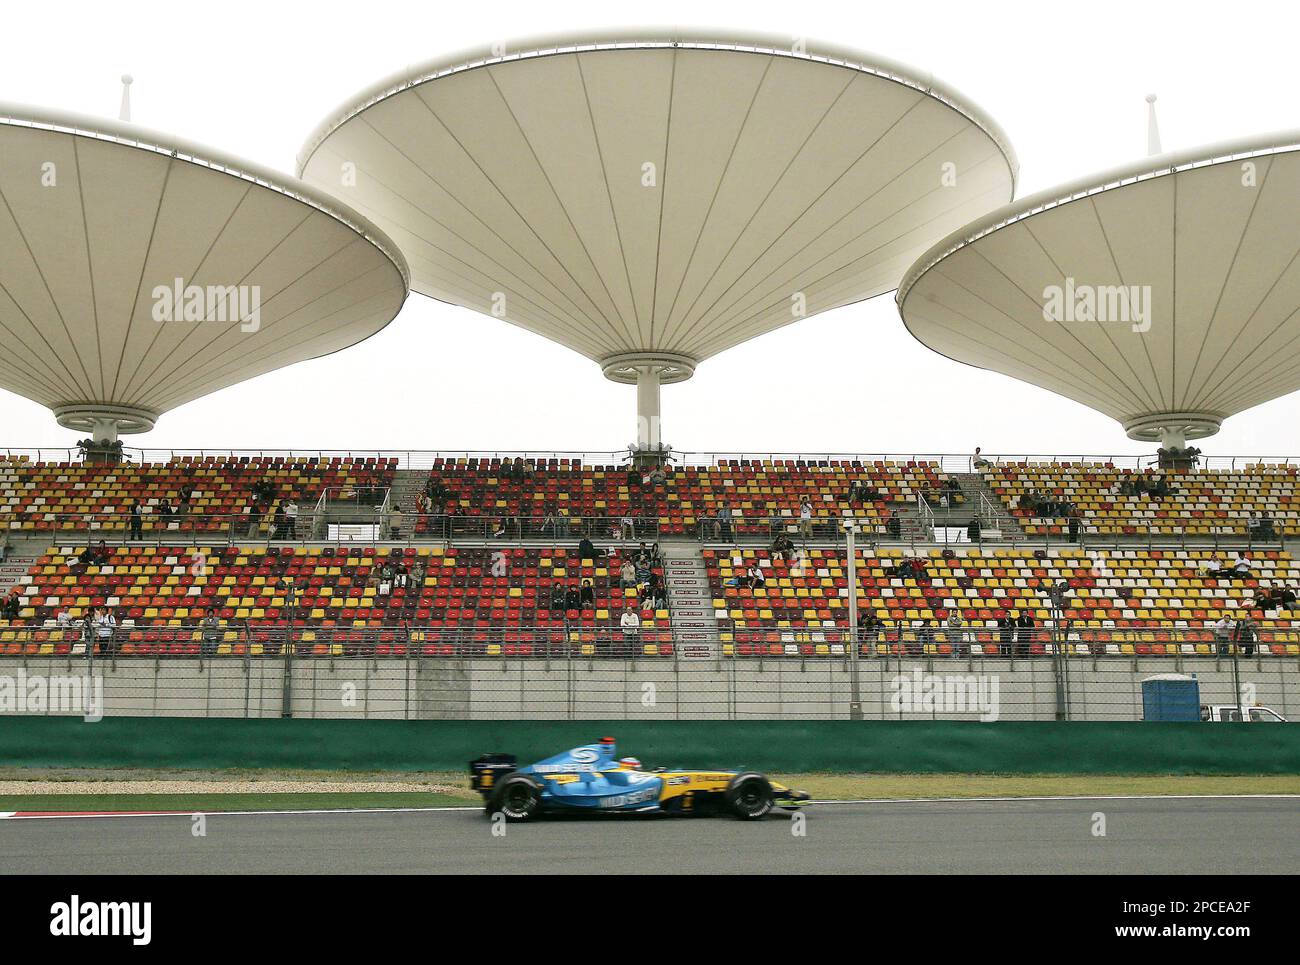 FILE ** Spanish driver Fernando Alonso of Renault F1 team drives his car during the second free practice at Shanghai International Circuit in Shanghai, China, in this October 14, 2005, file